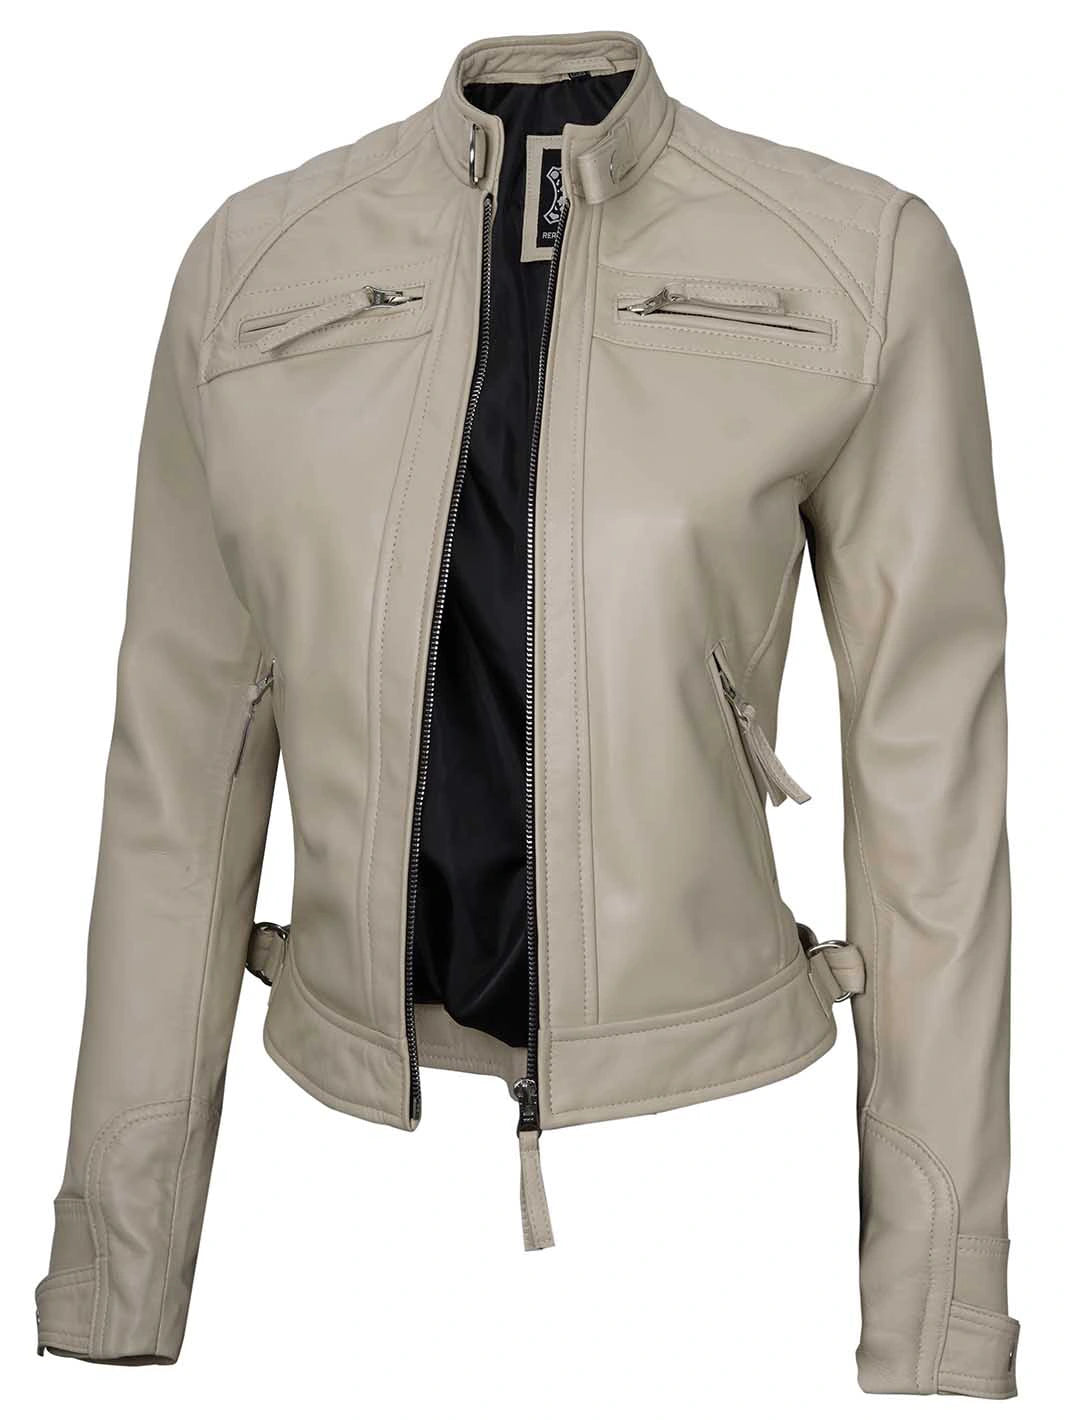 Womens real leather jacket